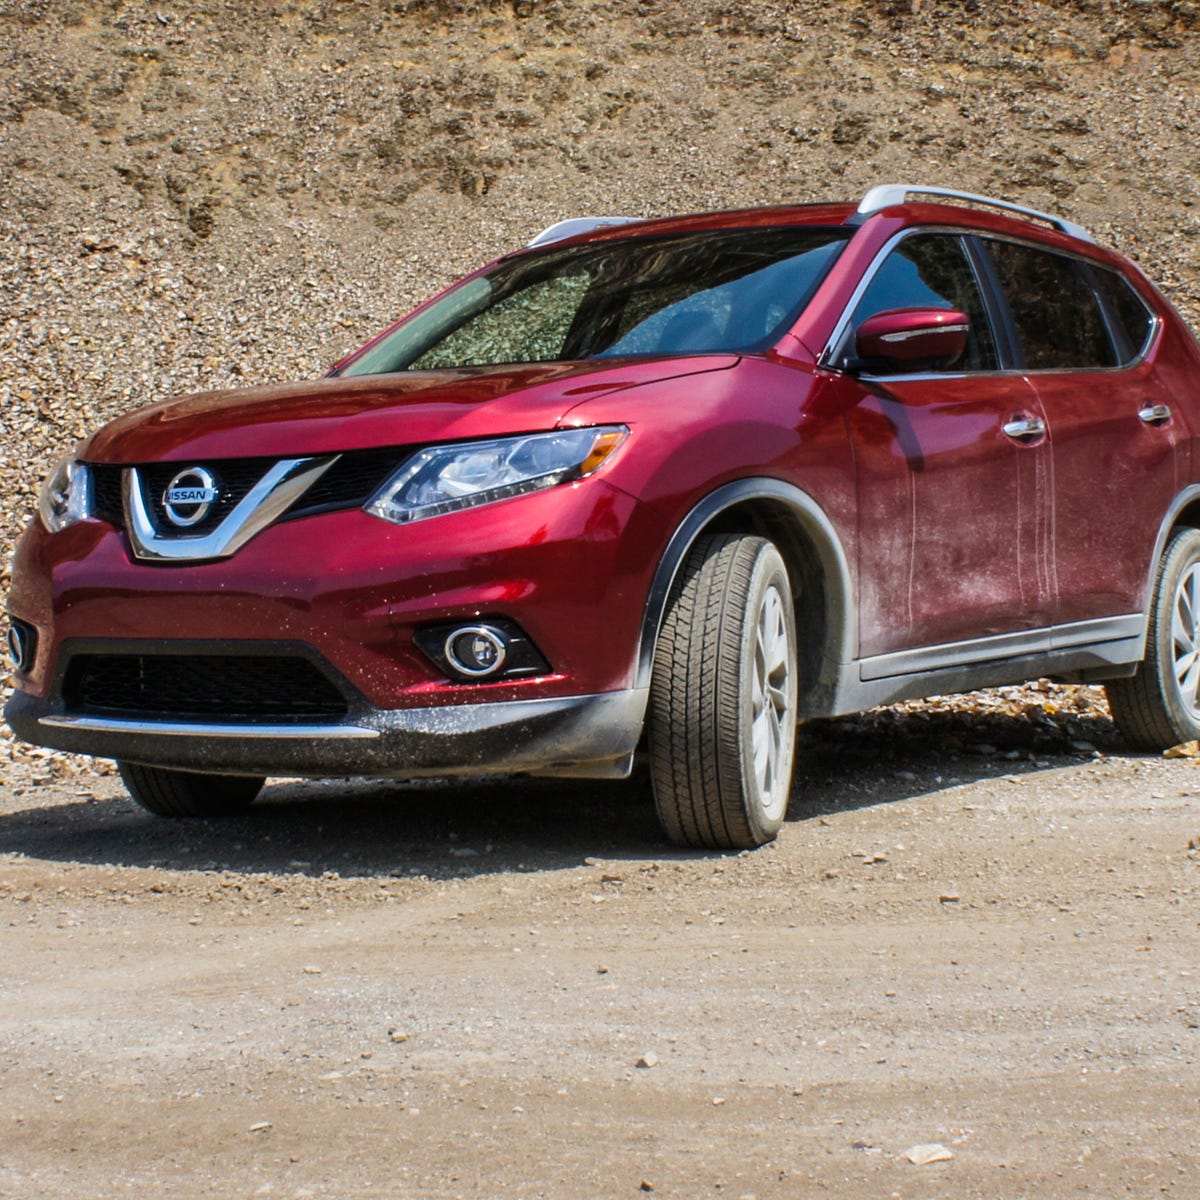 2014 Nissan Rogue review: New Nissan Rogue takes tech lead among  competition - CNET